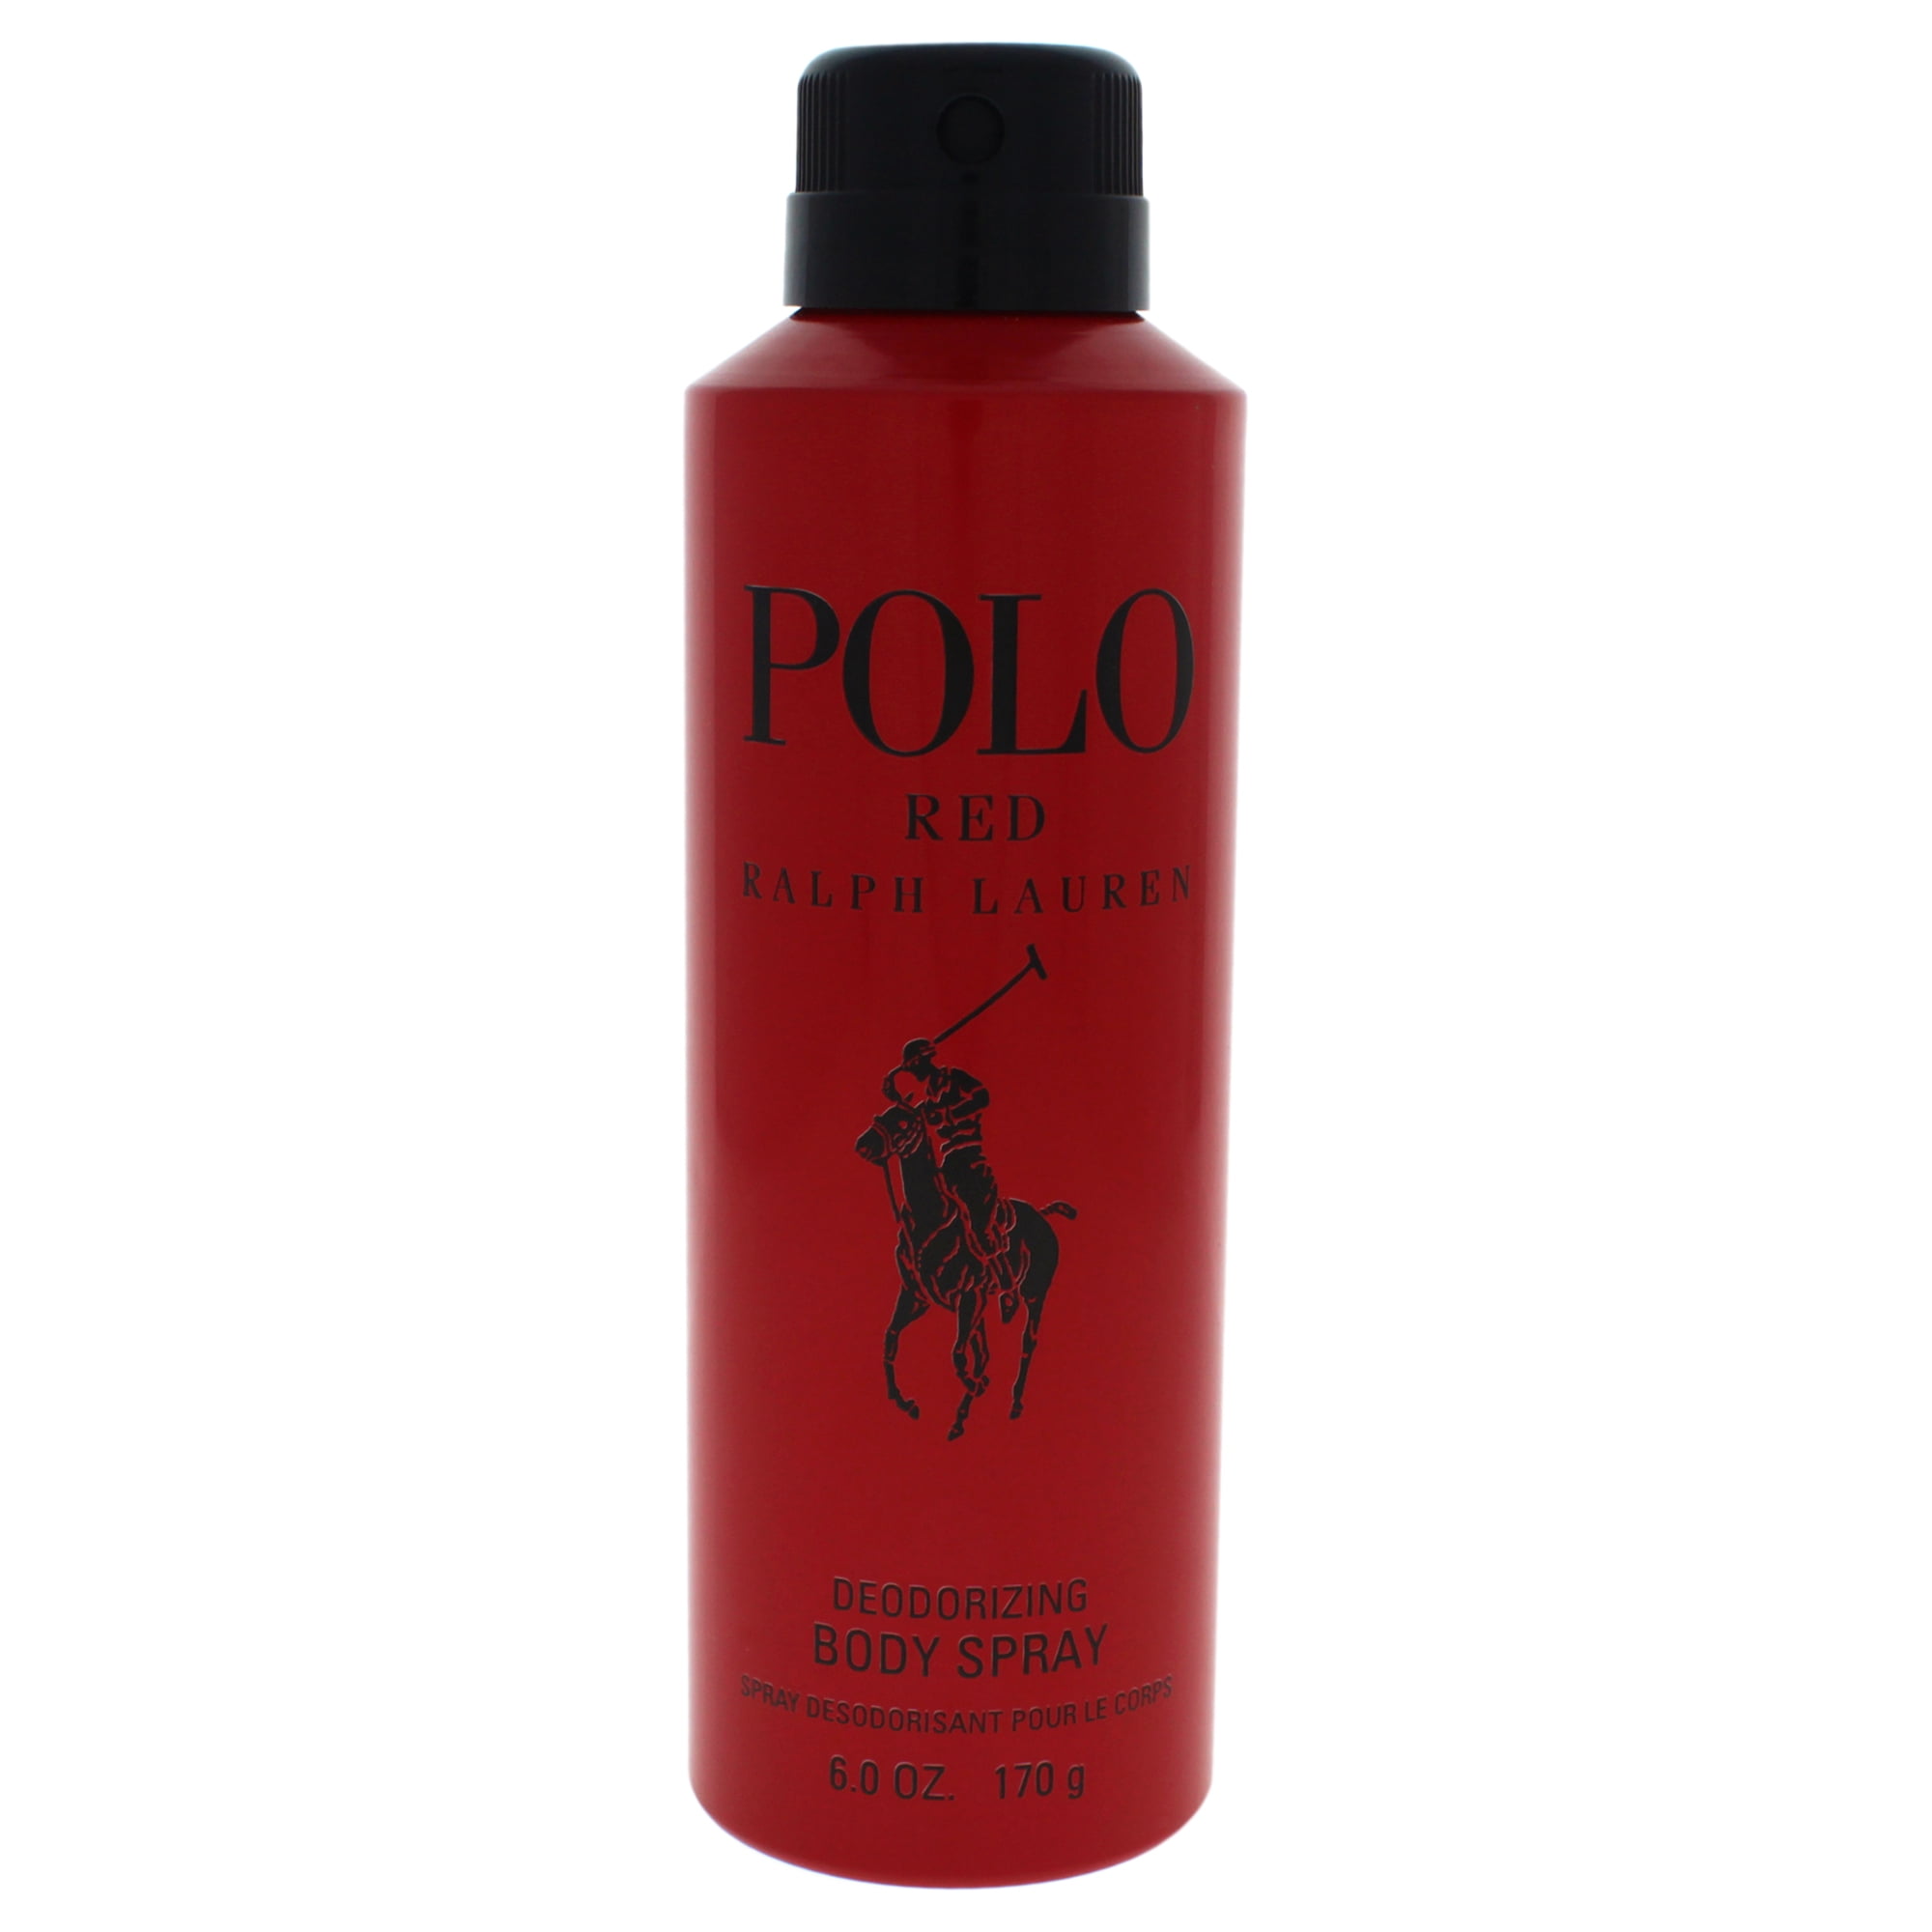  Ralph Lauren - Polo Red - Parfum - Men's Cologne - Ambery &  Woody - With Absinthe, Cedarwood, and Musk - Intense Fragrance - 1.36 Fl Oz  : Beauty & Personal Care